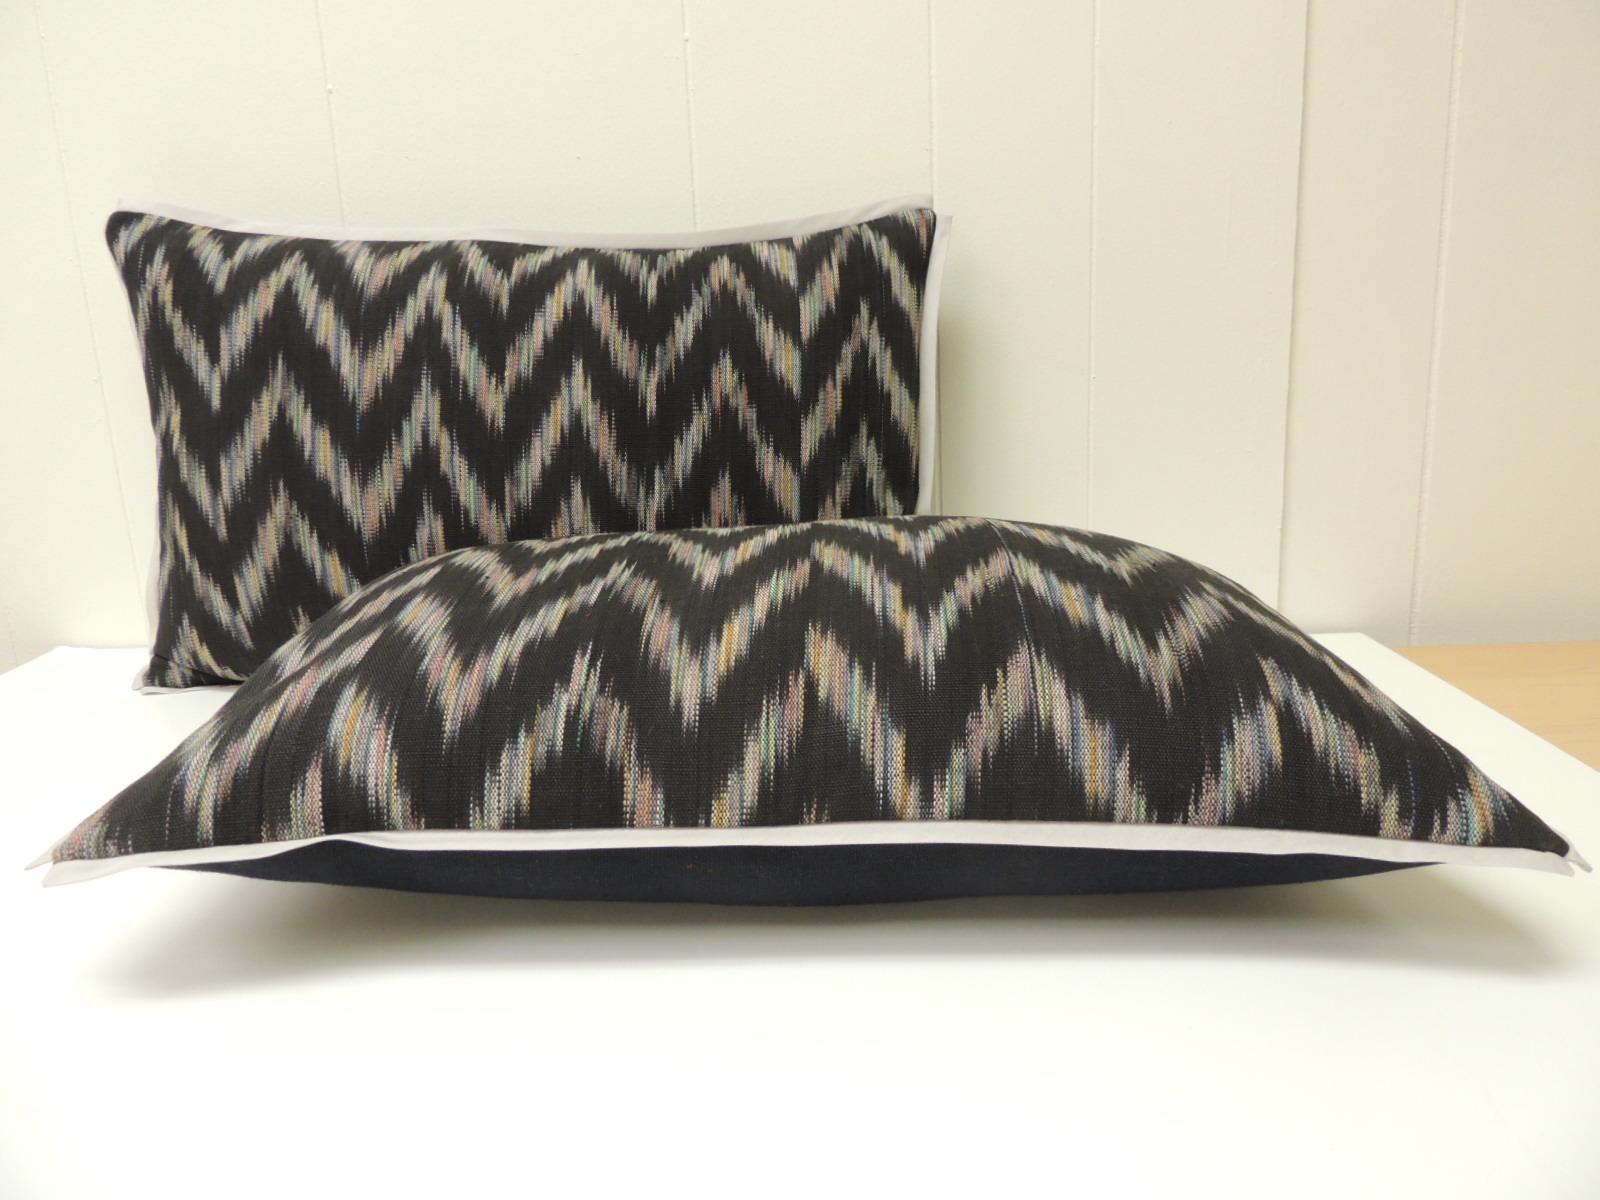 Hand-Crafted Vintage Ikat Woven Blue and Grey Decorative Lumbar Pillows